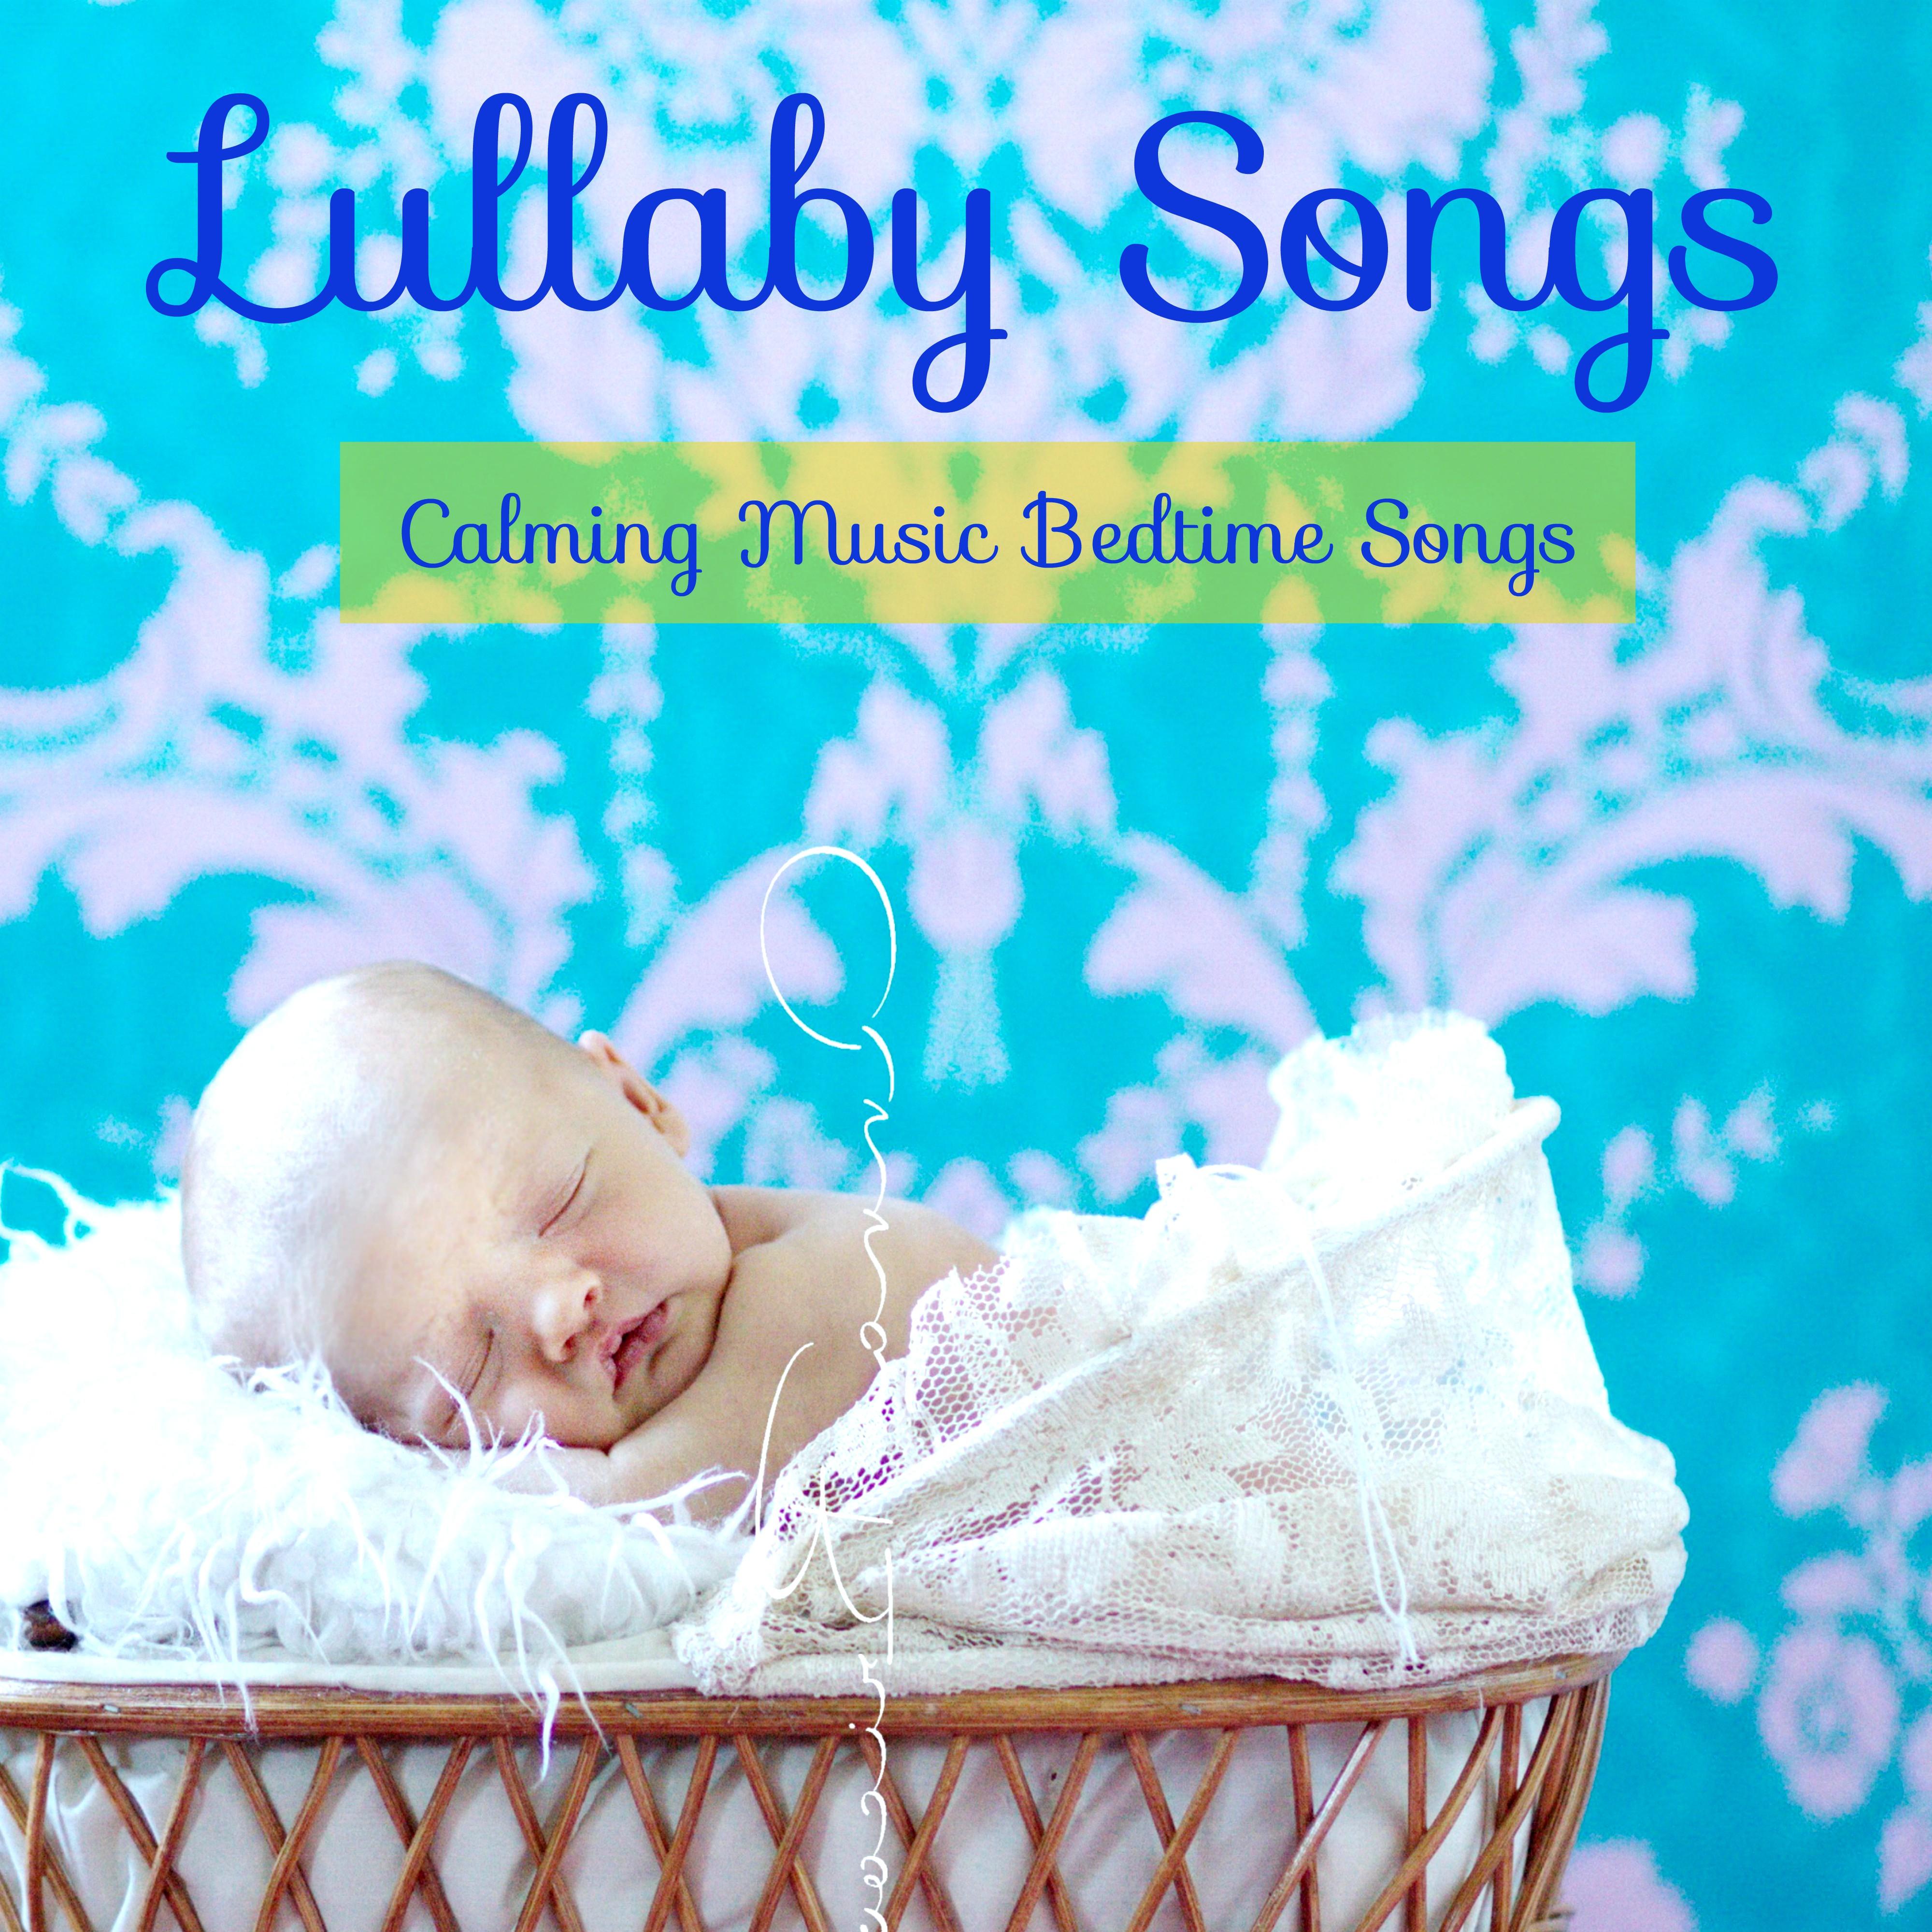 Lullaby Songs  Calming Music Bedtime Songs, Toddler Songs to Get Baby to Sleep Through the Night, Classical Baby Lullabies